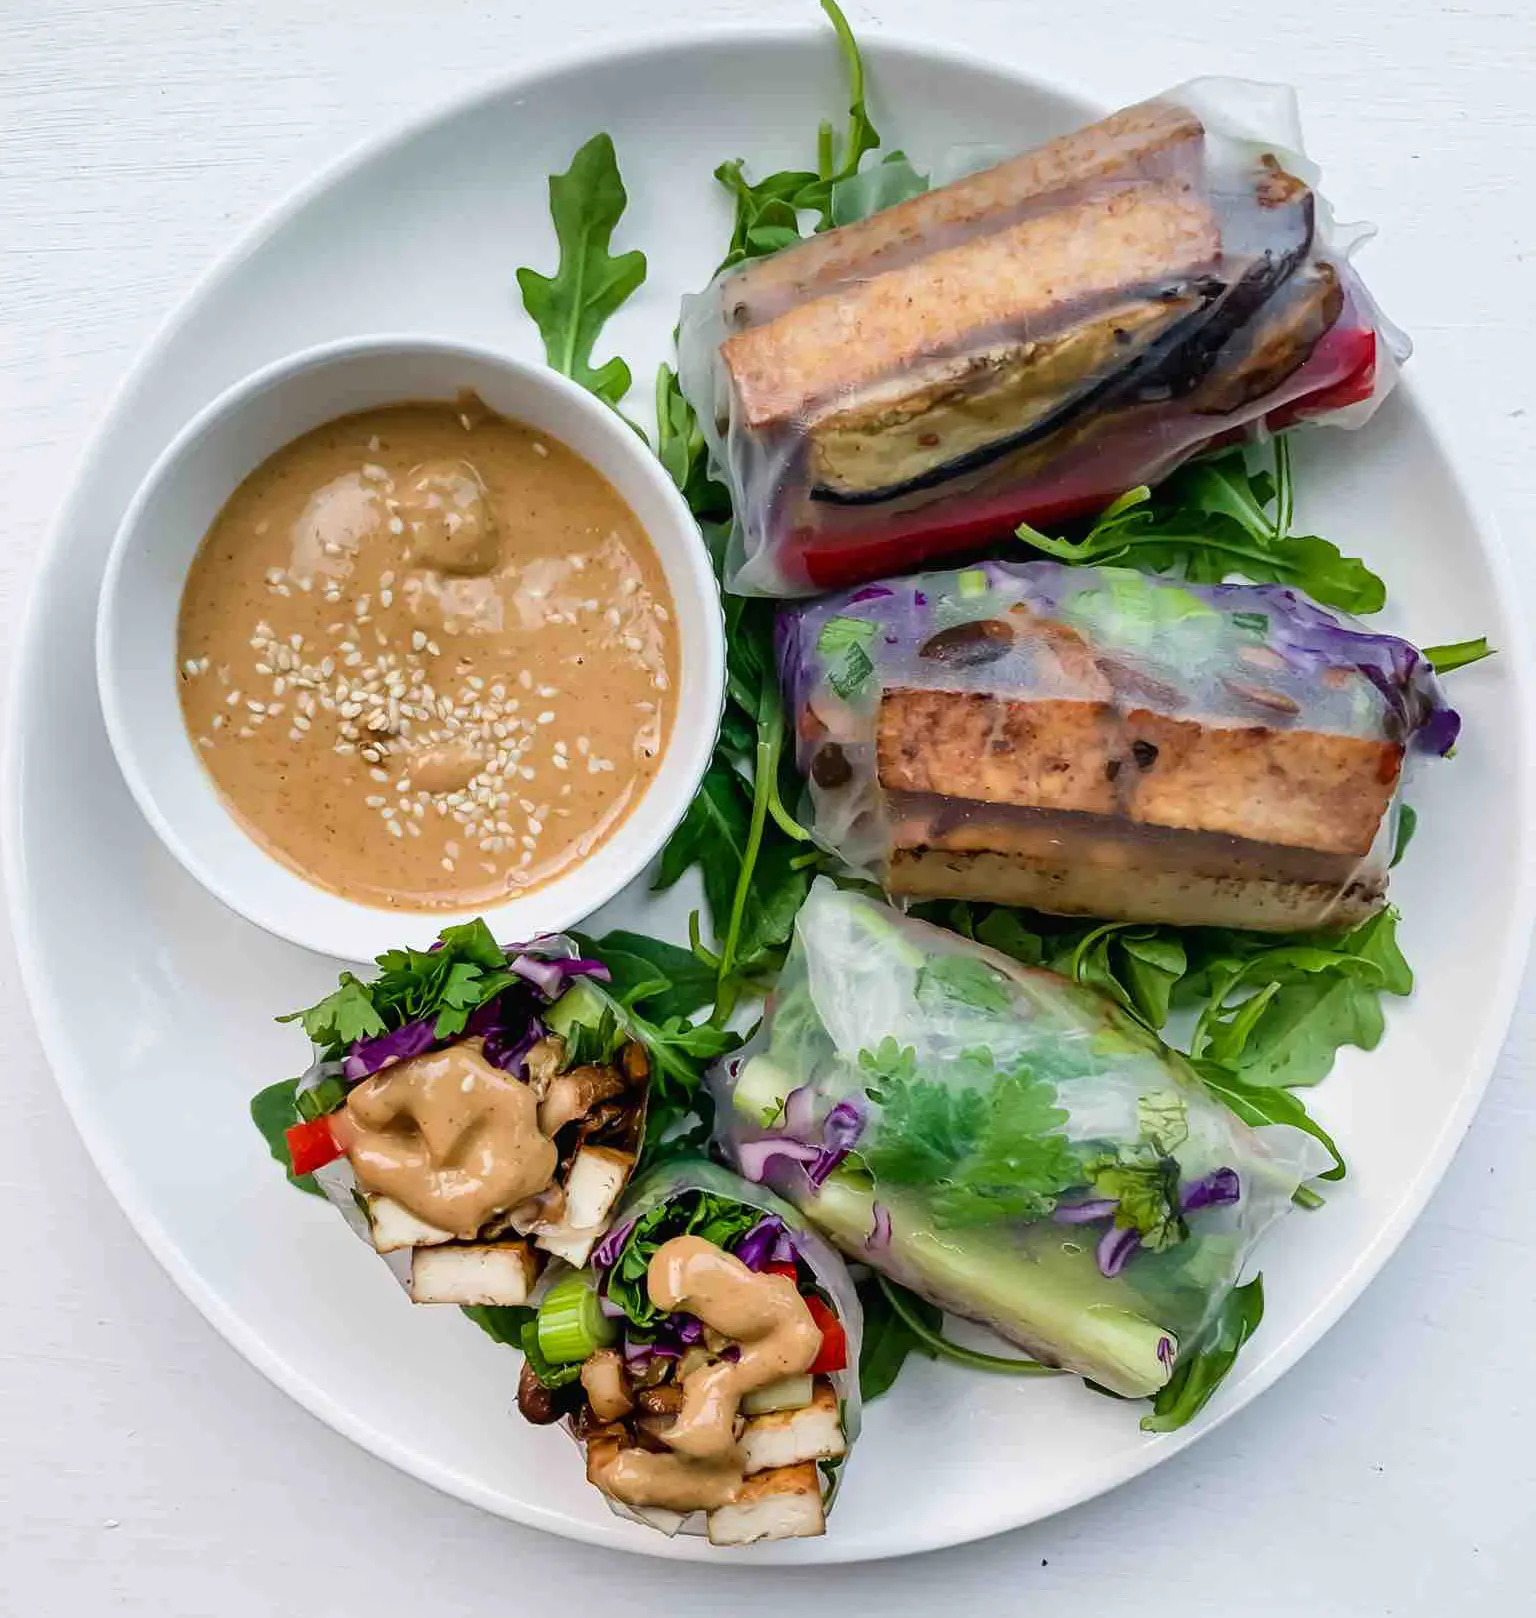 summer-rolls-with-sweet-spicy-peanut-dipping-sauce-1